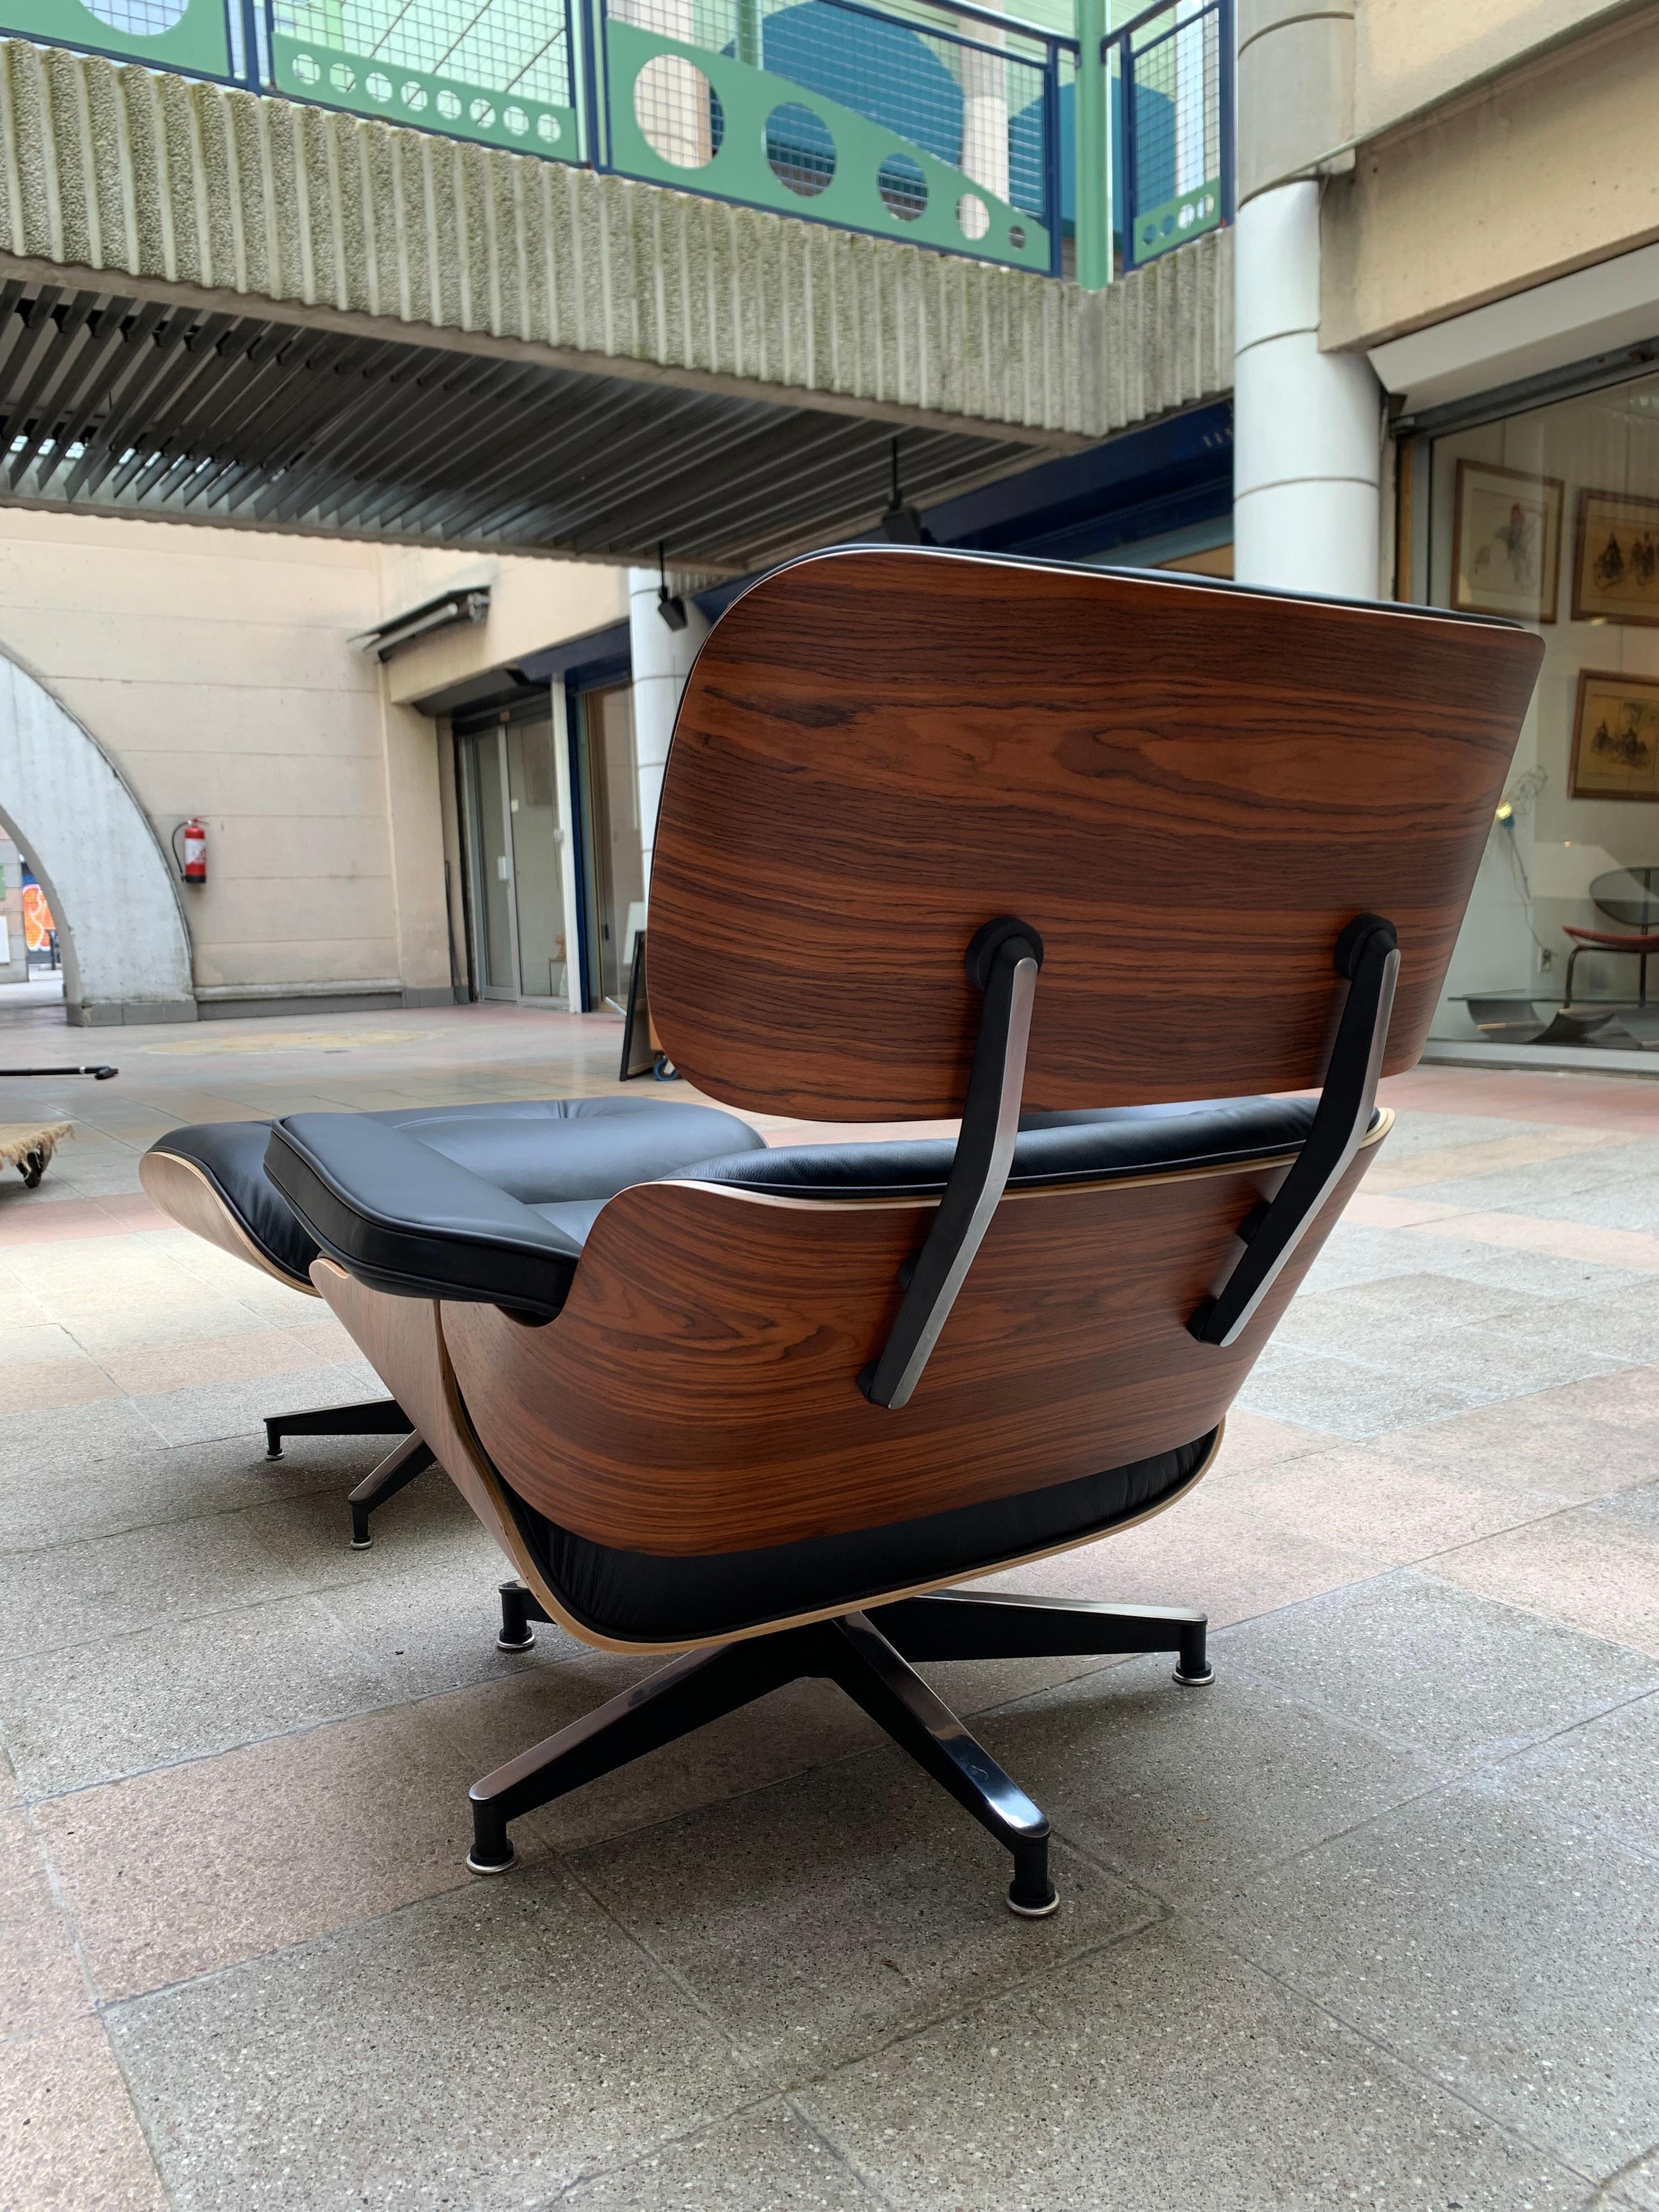 Charles Eames, lounge chair and its black leather and rosewood ottoman, circa 2011

Edition Herman Miller, USA, 2011
Black leather and rosewood 

Dimensions:
Chair H 82 x W 83 x L 83
Ottoman 44 x 54 x 66

Perfect condition. 

2 pairs